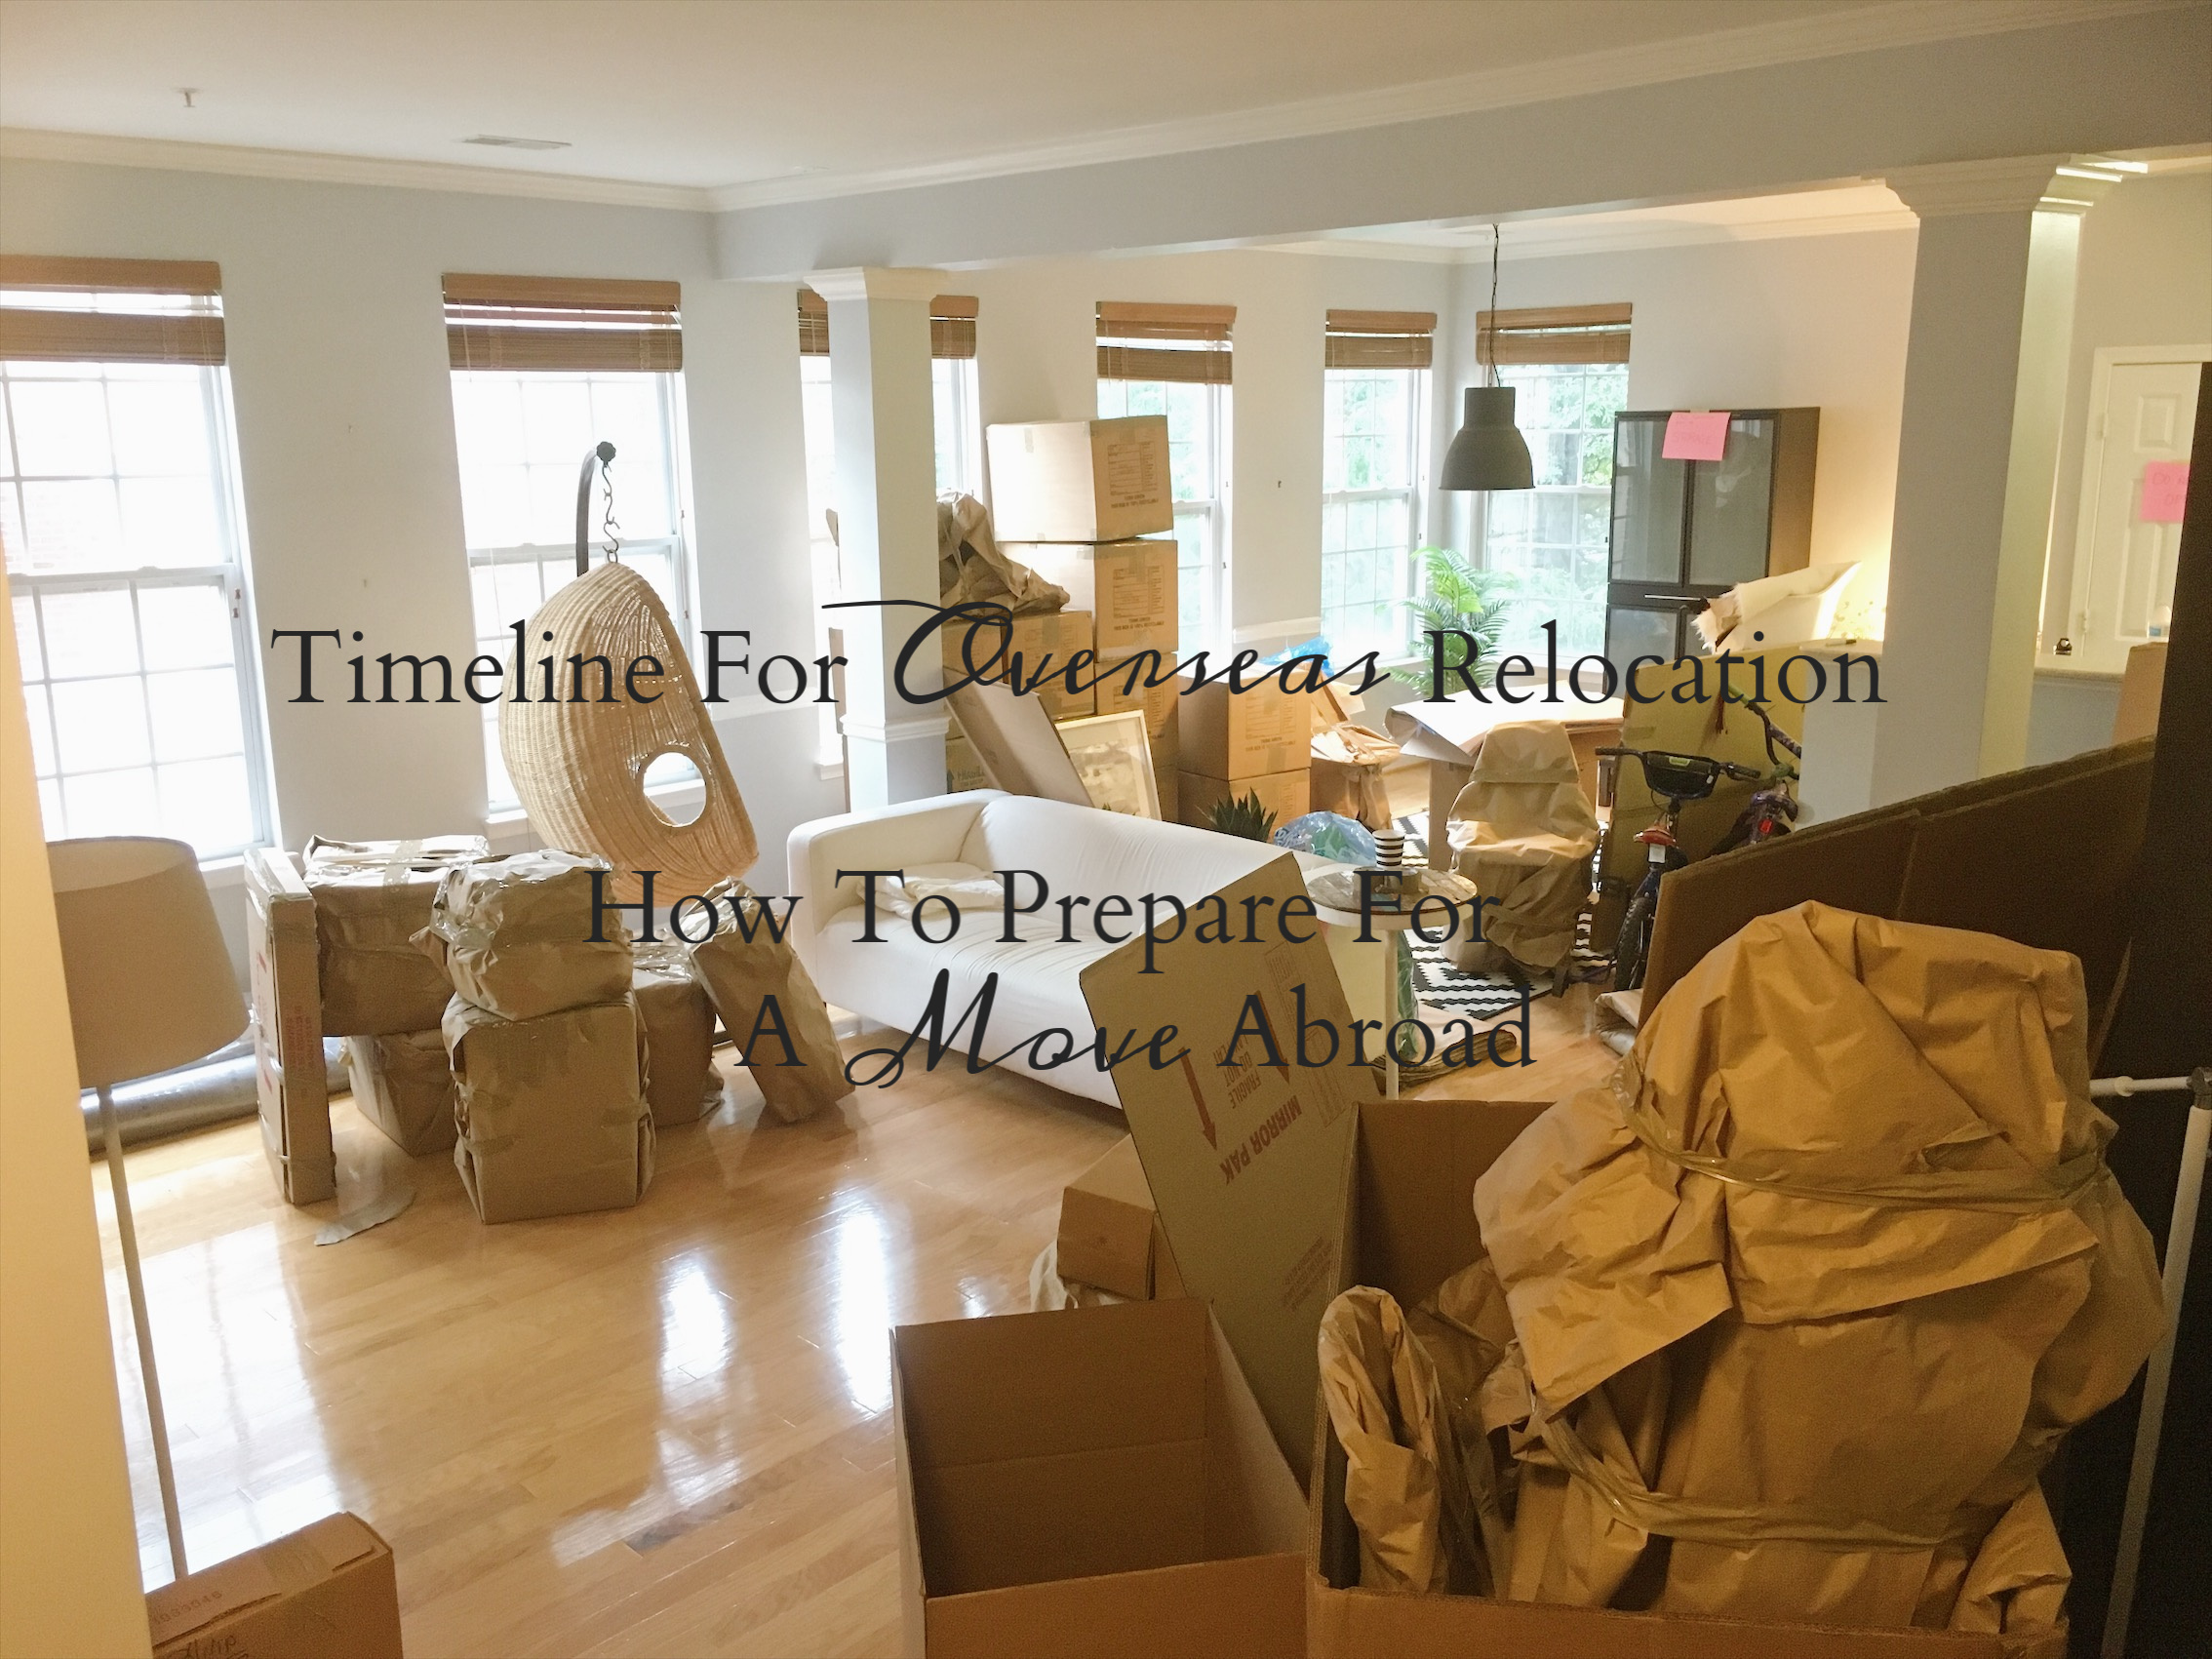 Time Line For Overseas Relocation How To Prepare For A Move Abroad